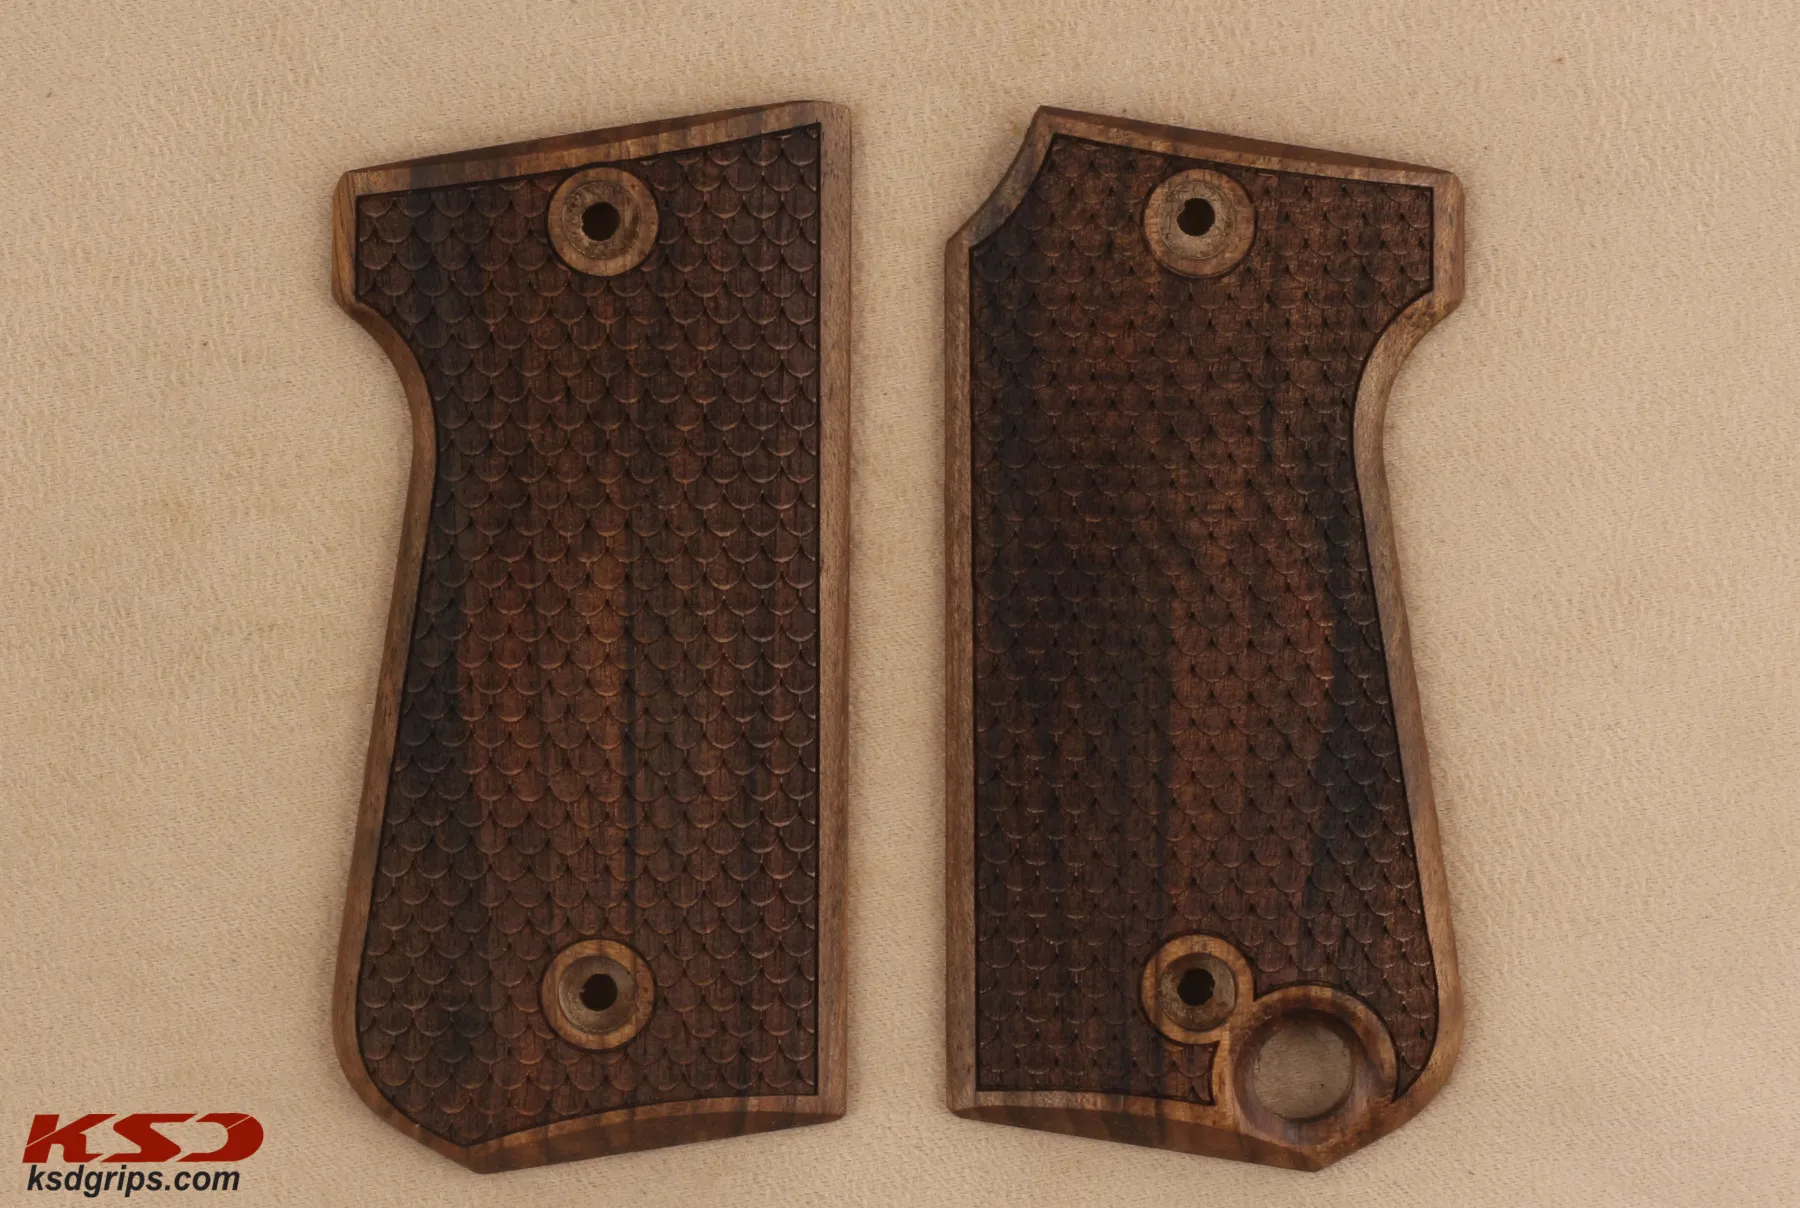 

KSDGrips Brand for Unique RR 51 Compatible Walnut Grip for Replacement (with Python Pattern)